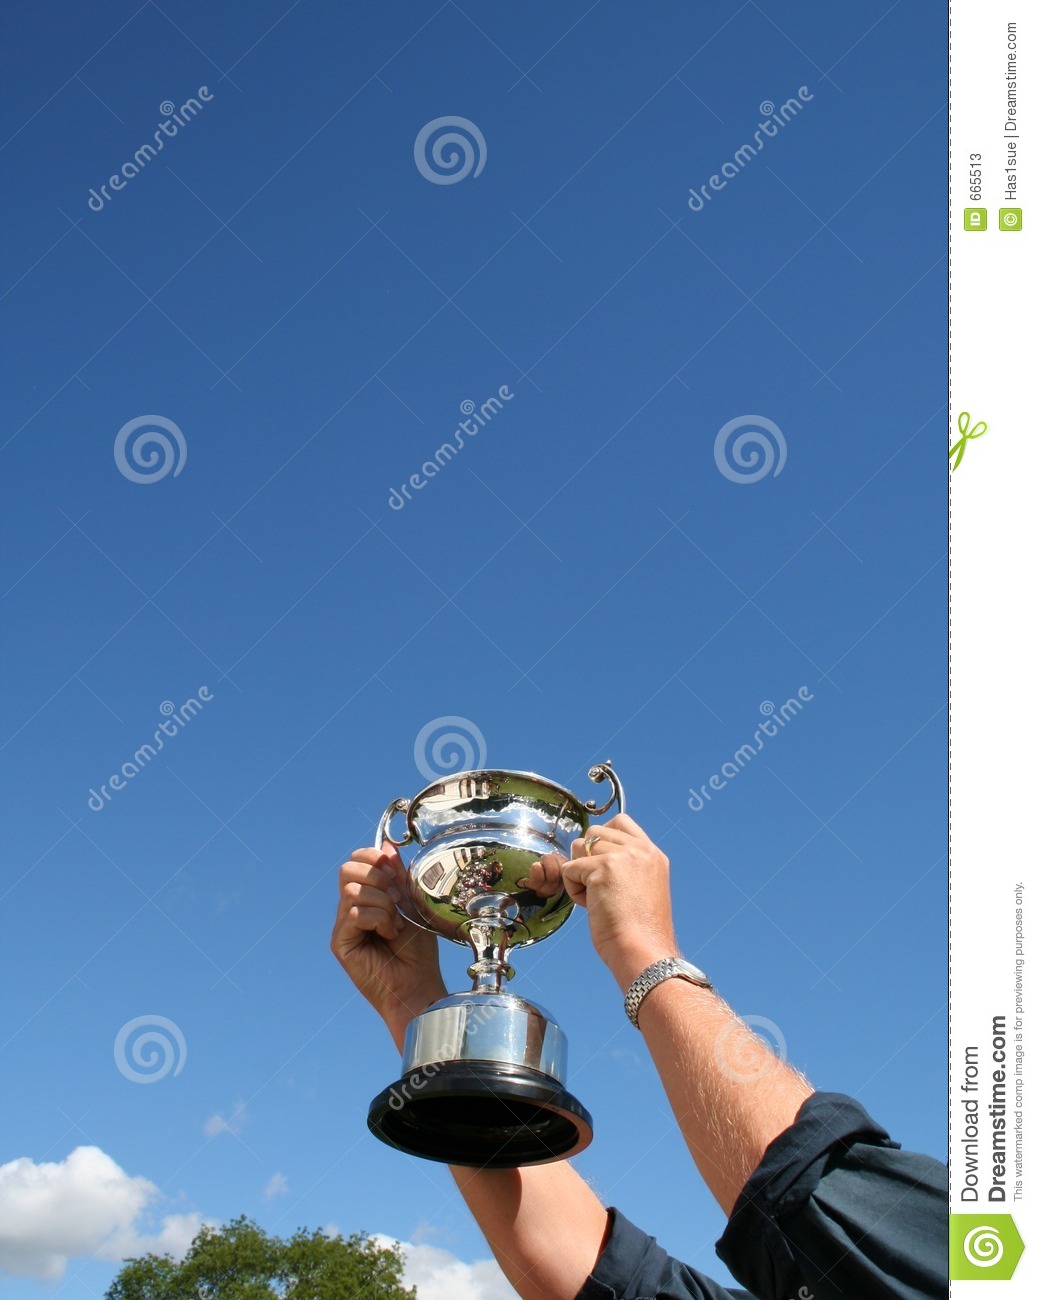 We Have A Winner Stock Photos   Image  665513